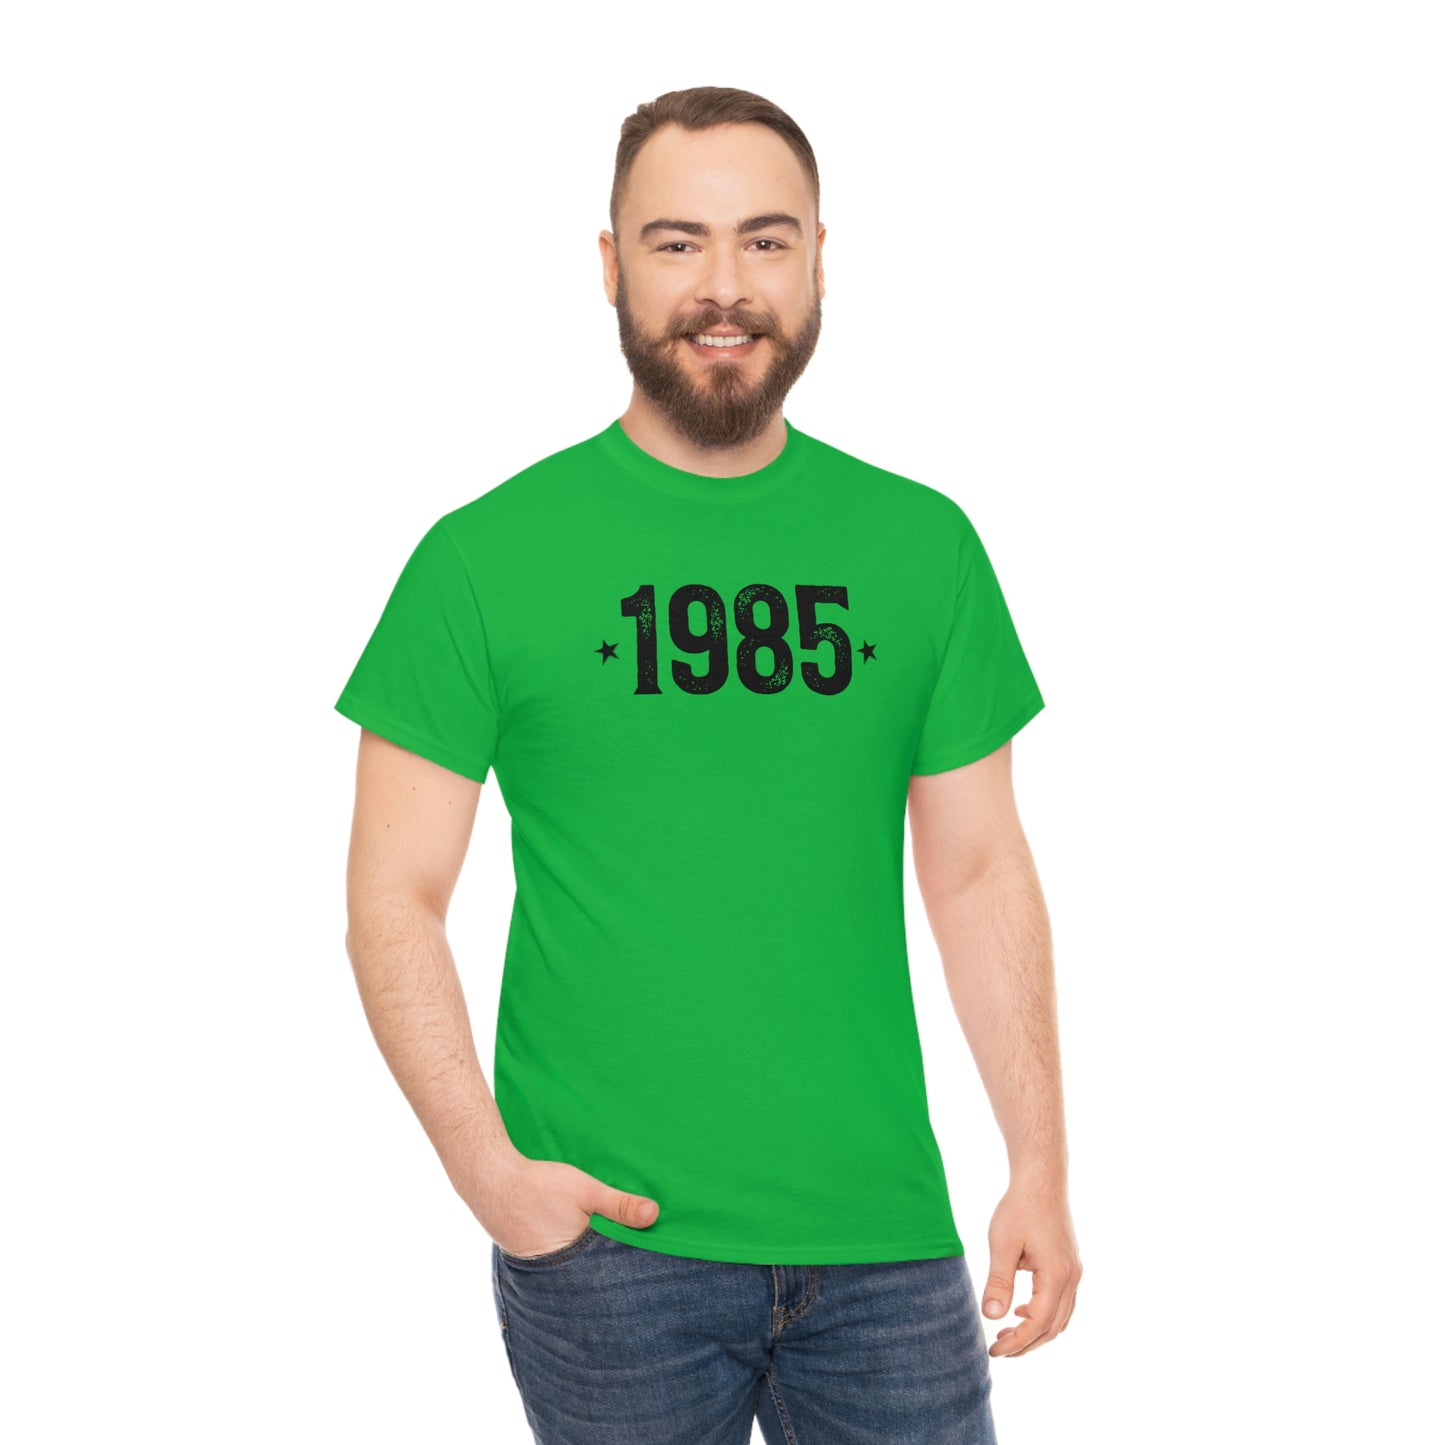 High-quality 1985 year commemorative t-shirt, perfect for casual fashion